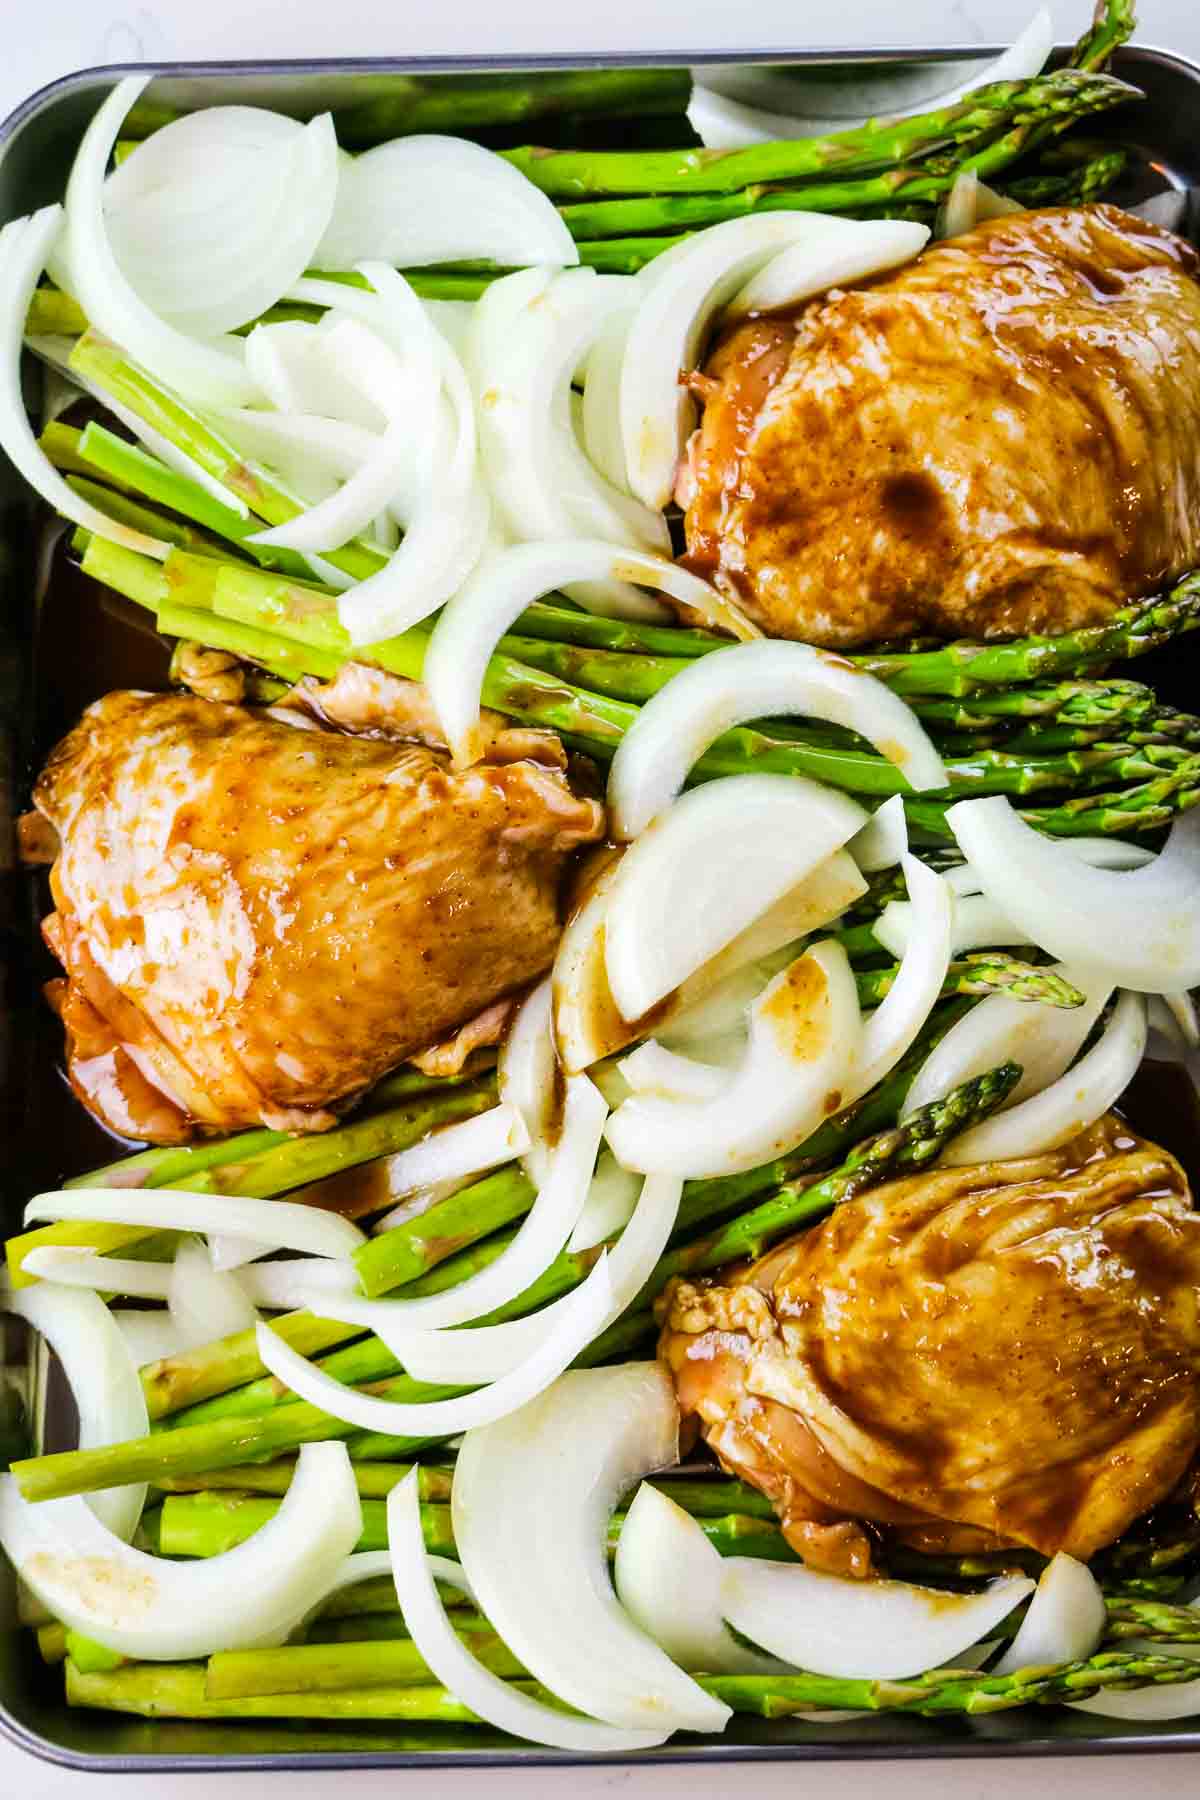 chicken thighs tucked in between asparagus and onions.